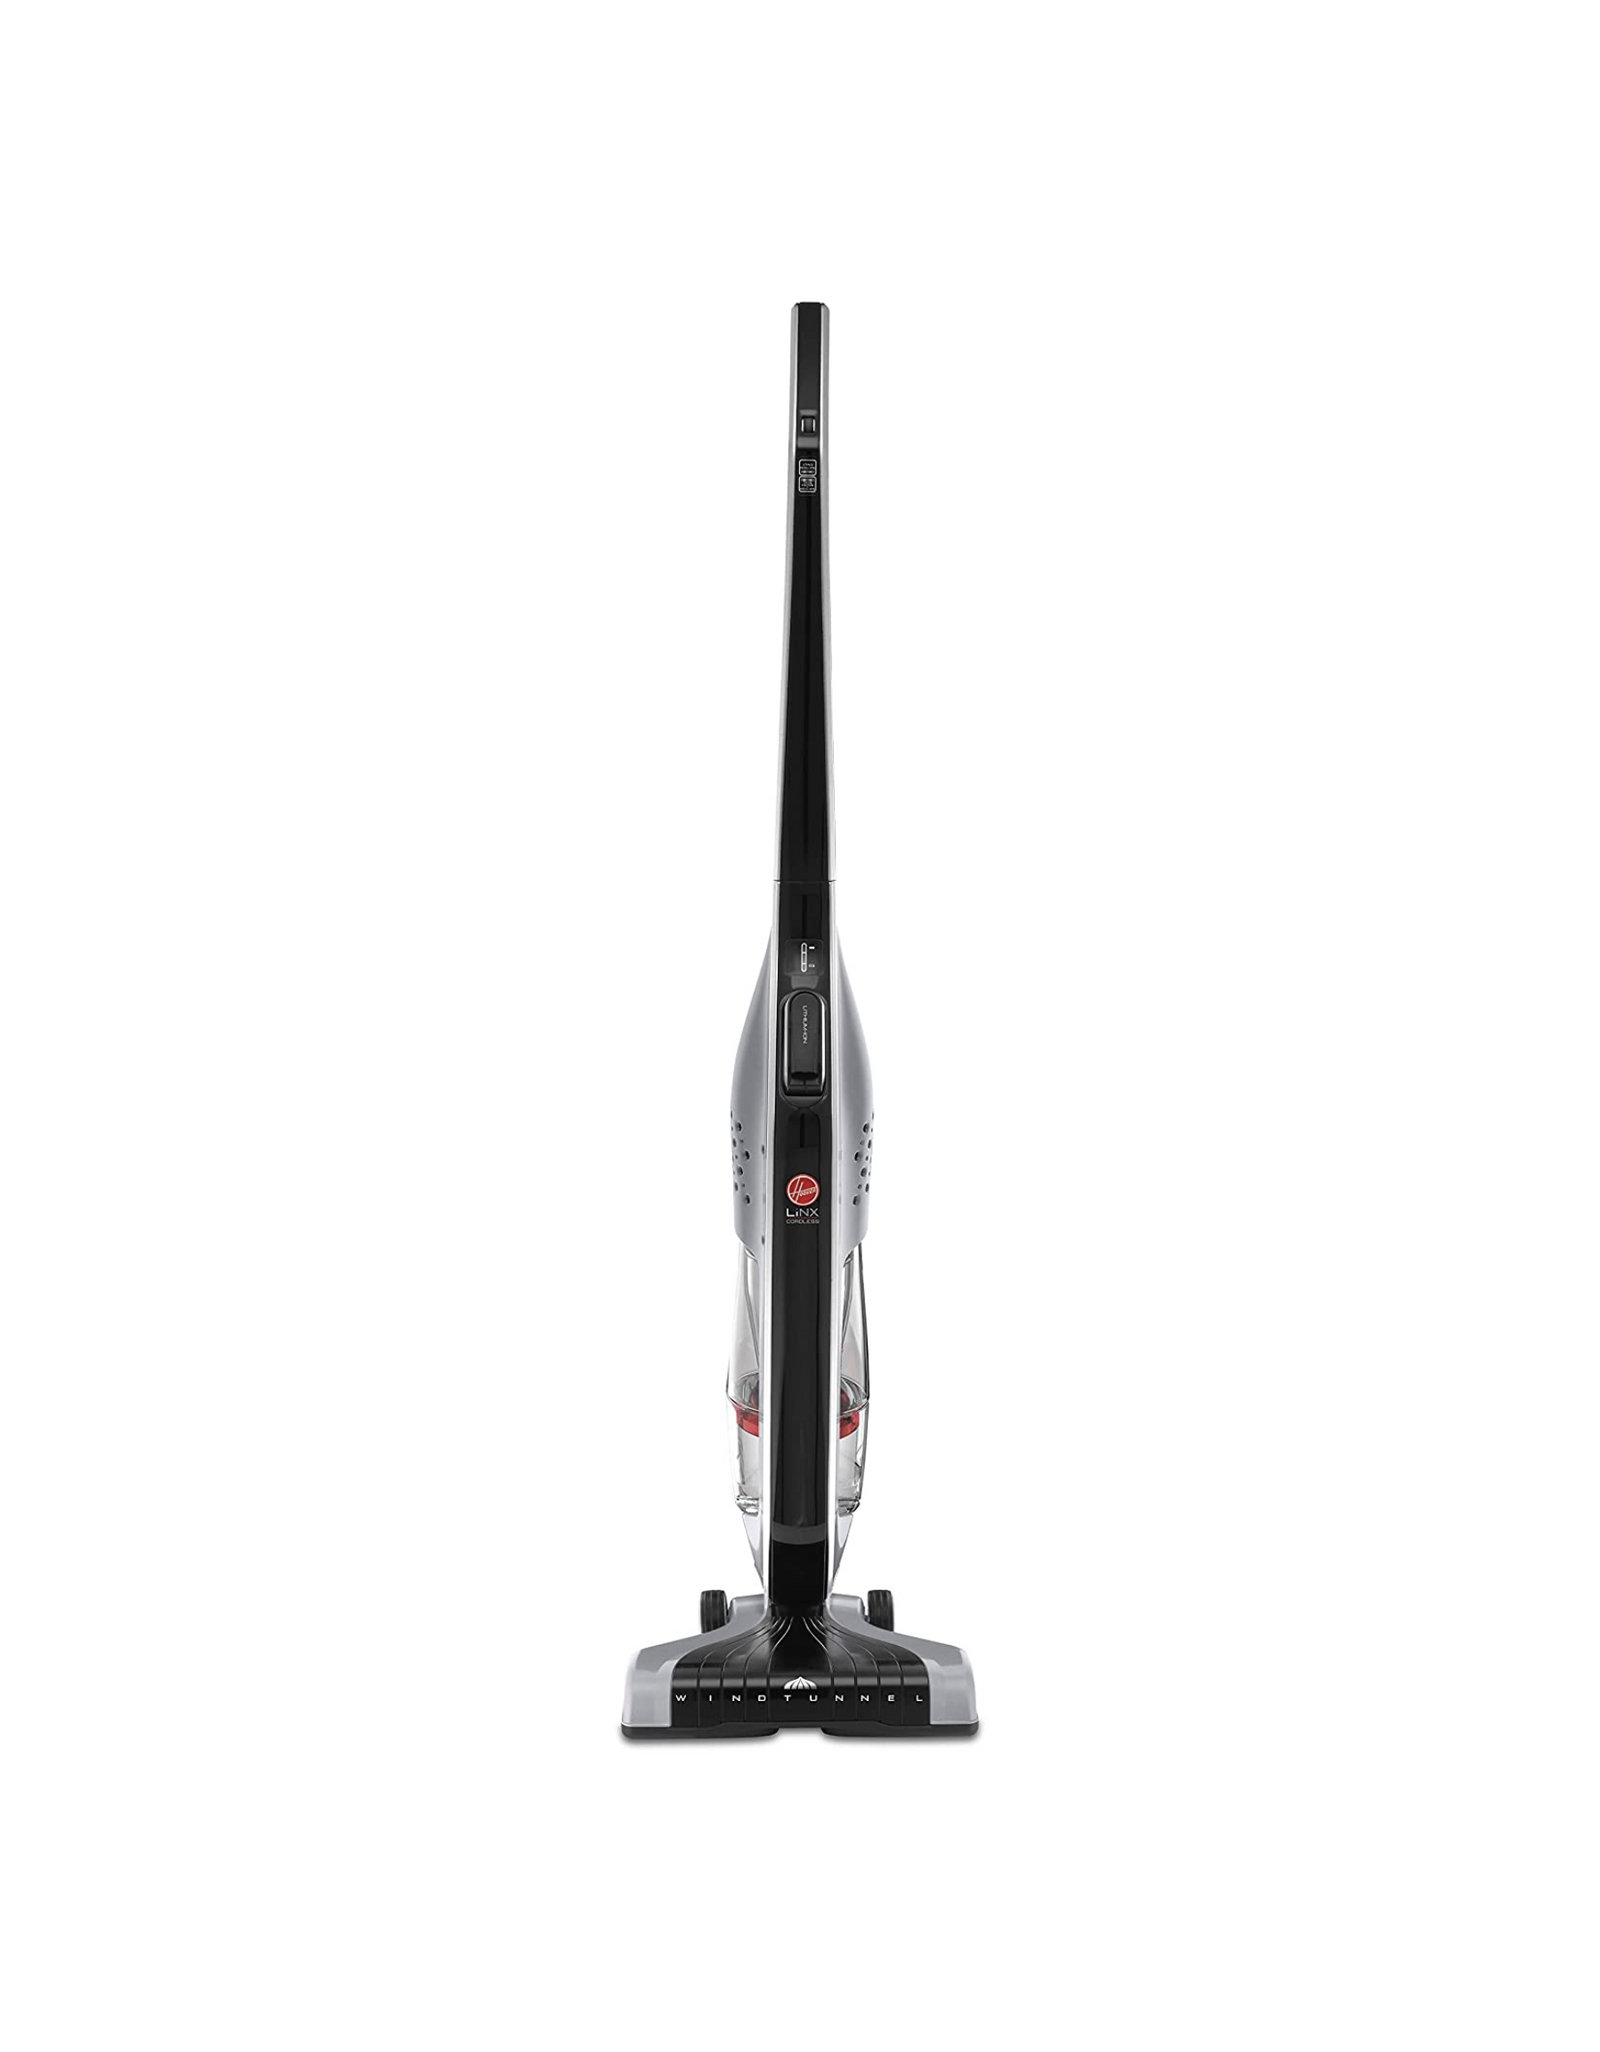 Hoover Linx Cordless Stick Vacuum Cleaner BH50010, Lightweight, Gray